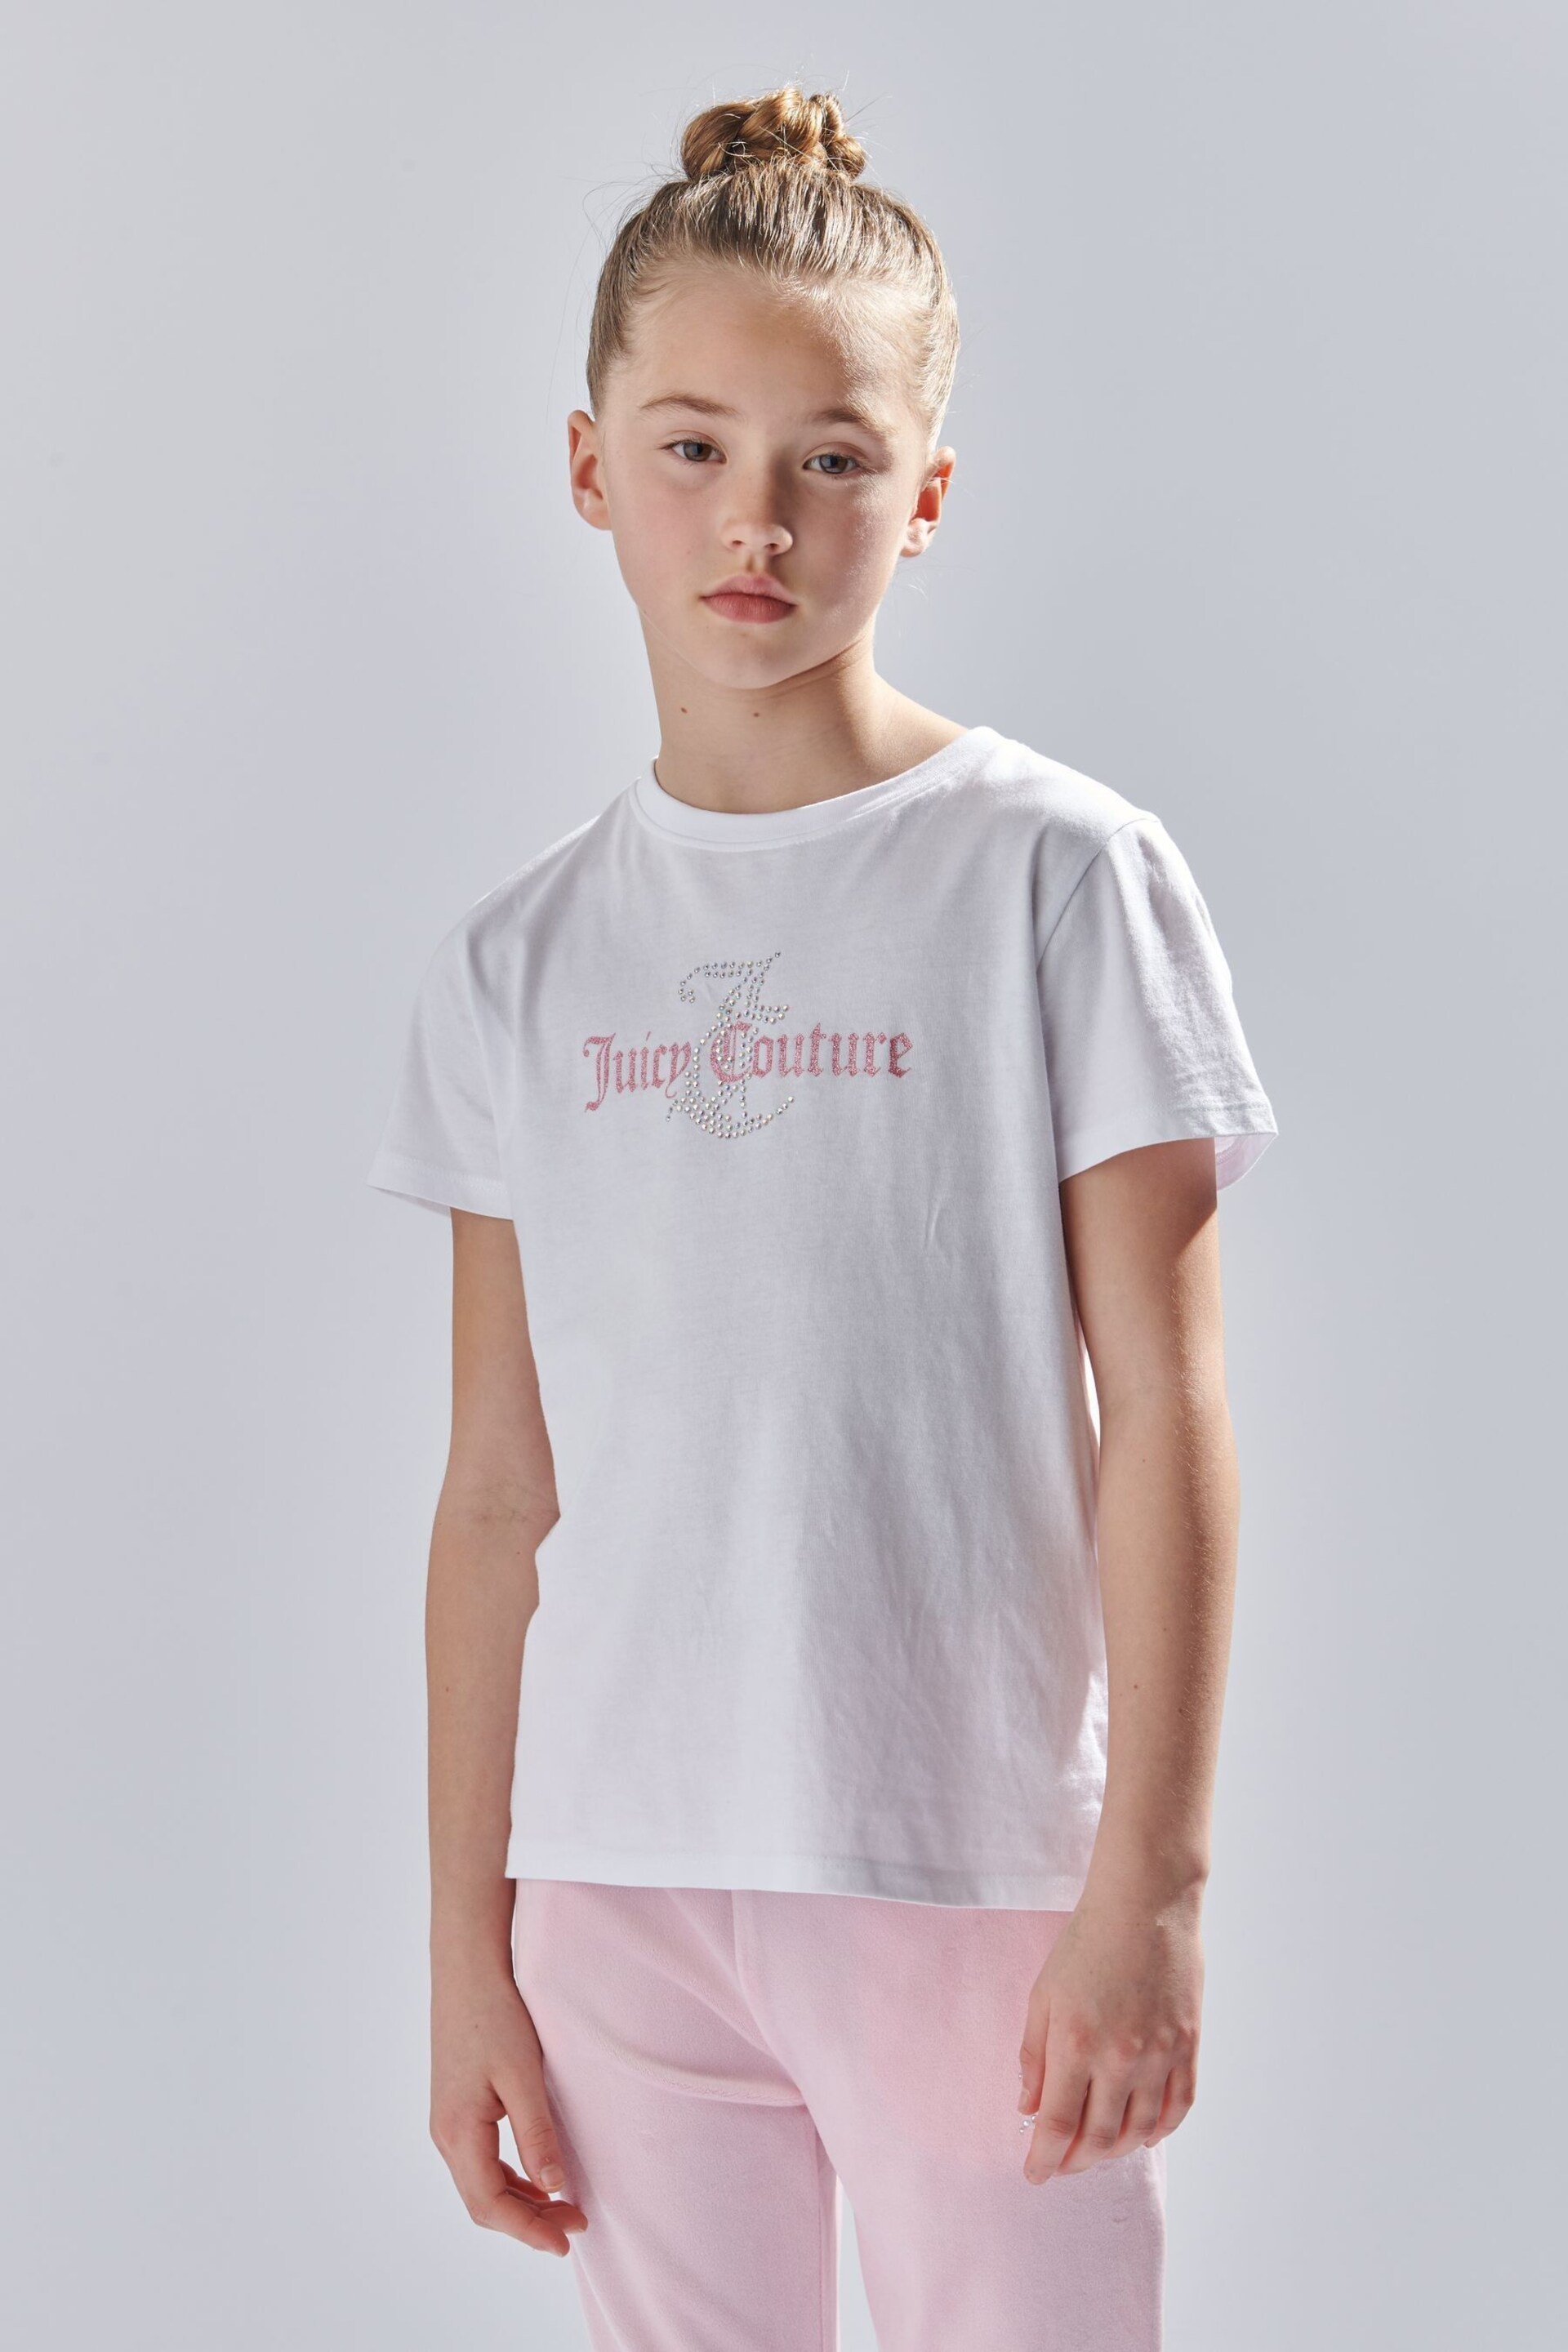 Juicy Couture Classic Fit Girls Diamante T-Shirt - Image 1 of 7